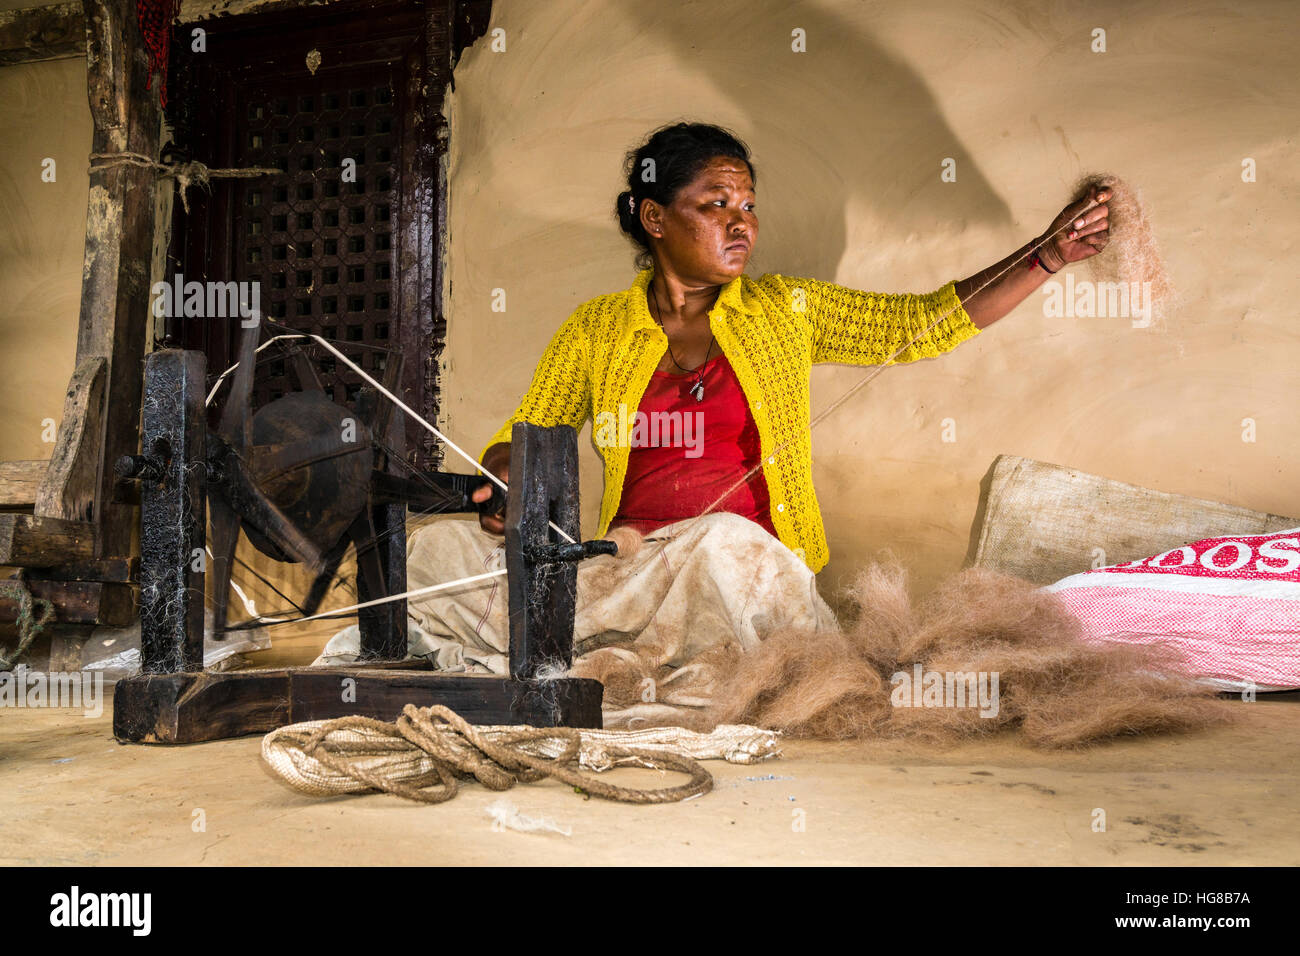 Native woman spinning sheep's wool with traditional spinning wheel in front of house, Ghandruk, Kaski District, Nepal Stock Photo